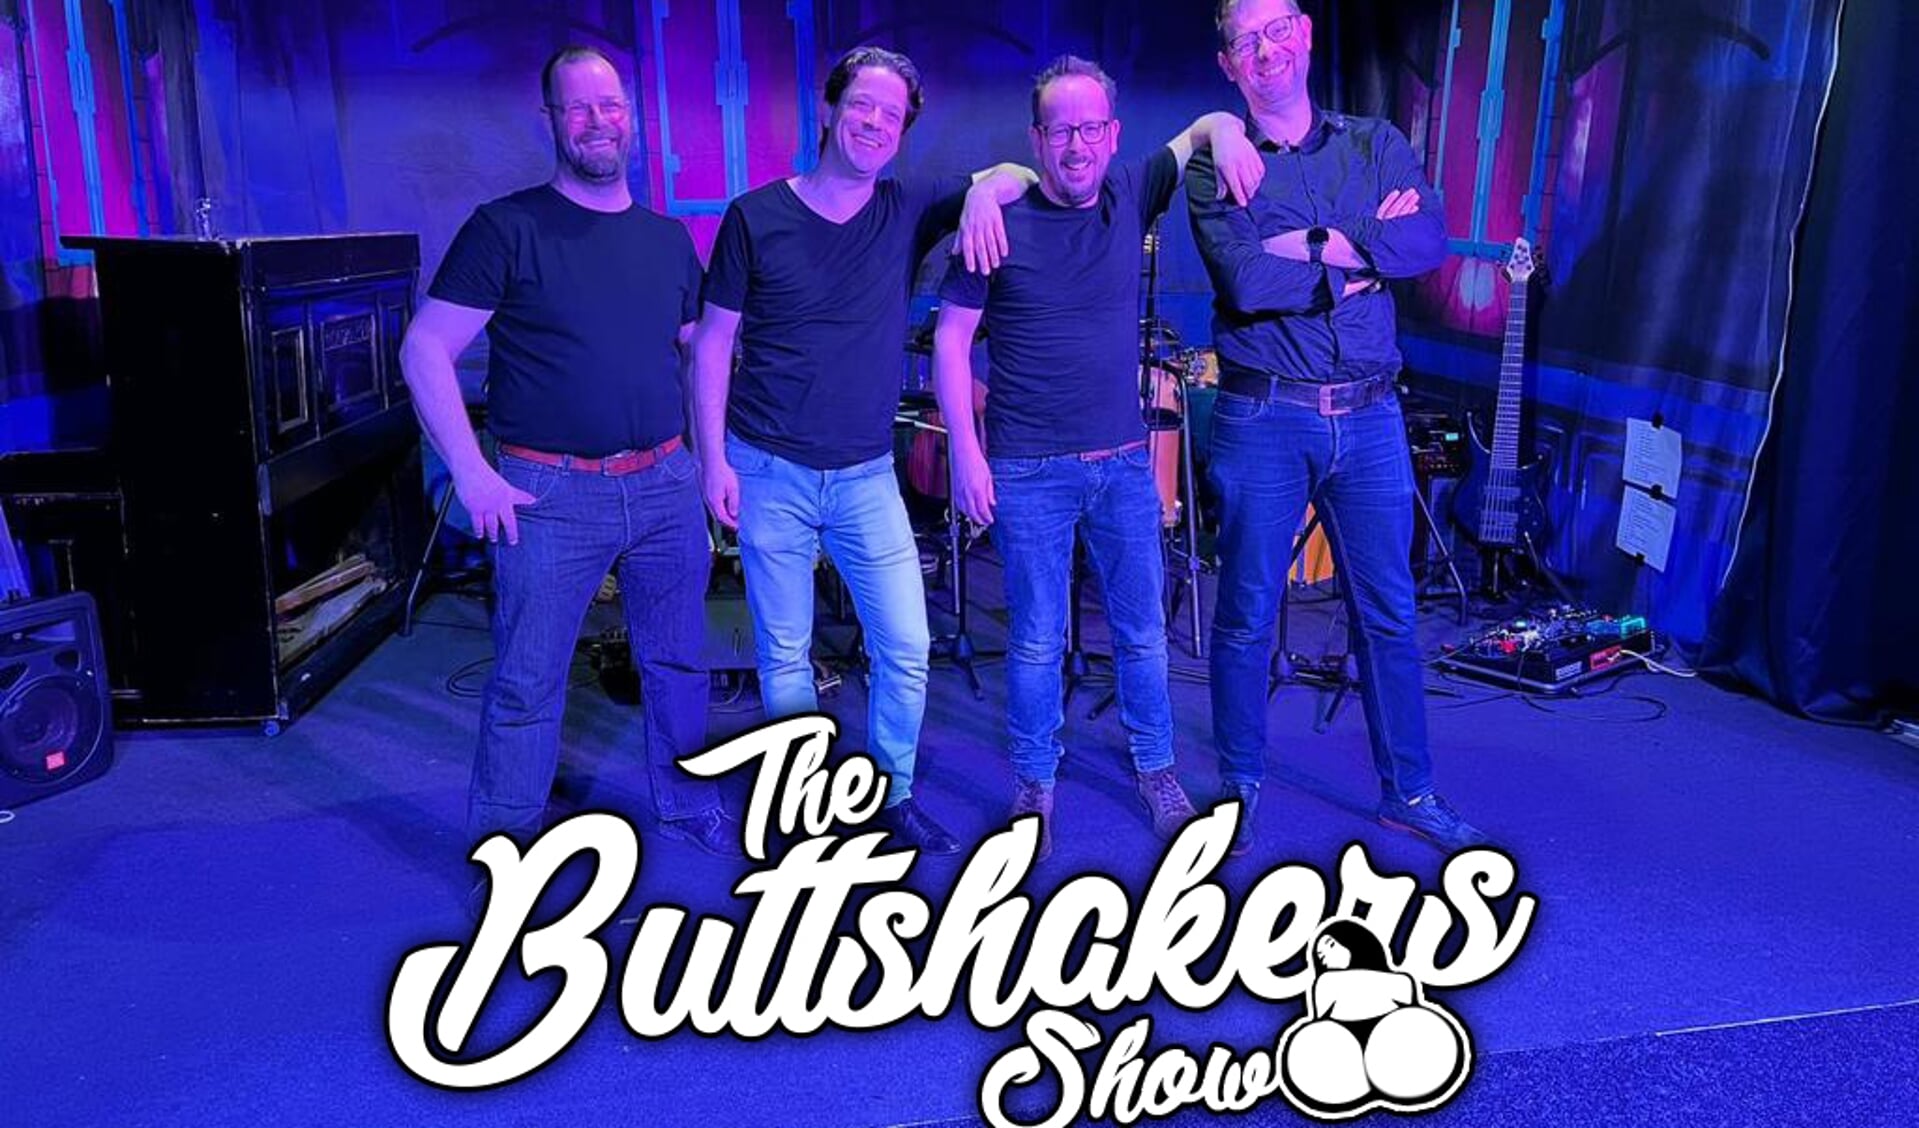 The Buttshakers Show.